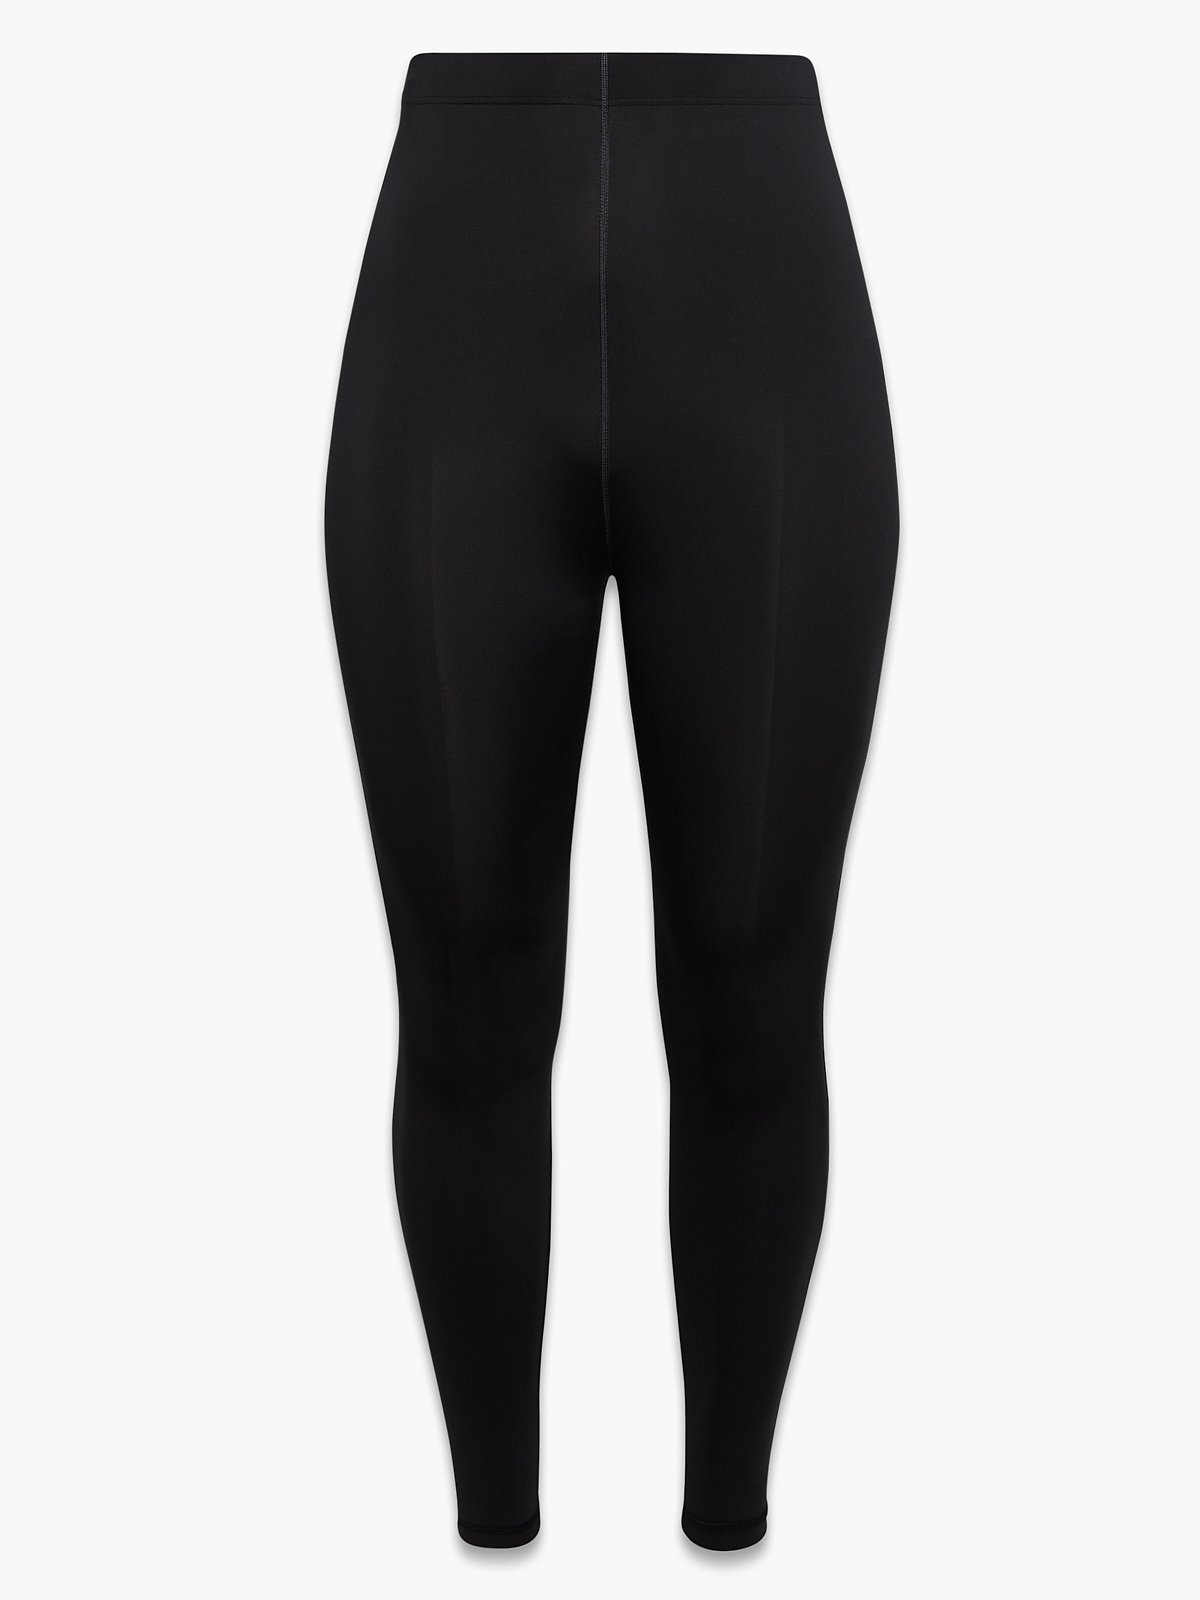 HMGYH satina high waisted leggings for women High Waist Split Thigh Wide  Leg Pants (Color : Black, Size : L) : Buy Online at Best Price in KSA -  Souq is now : Fashion